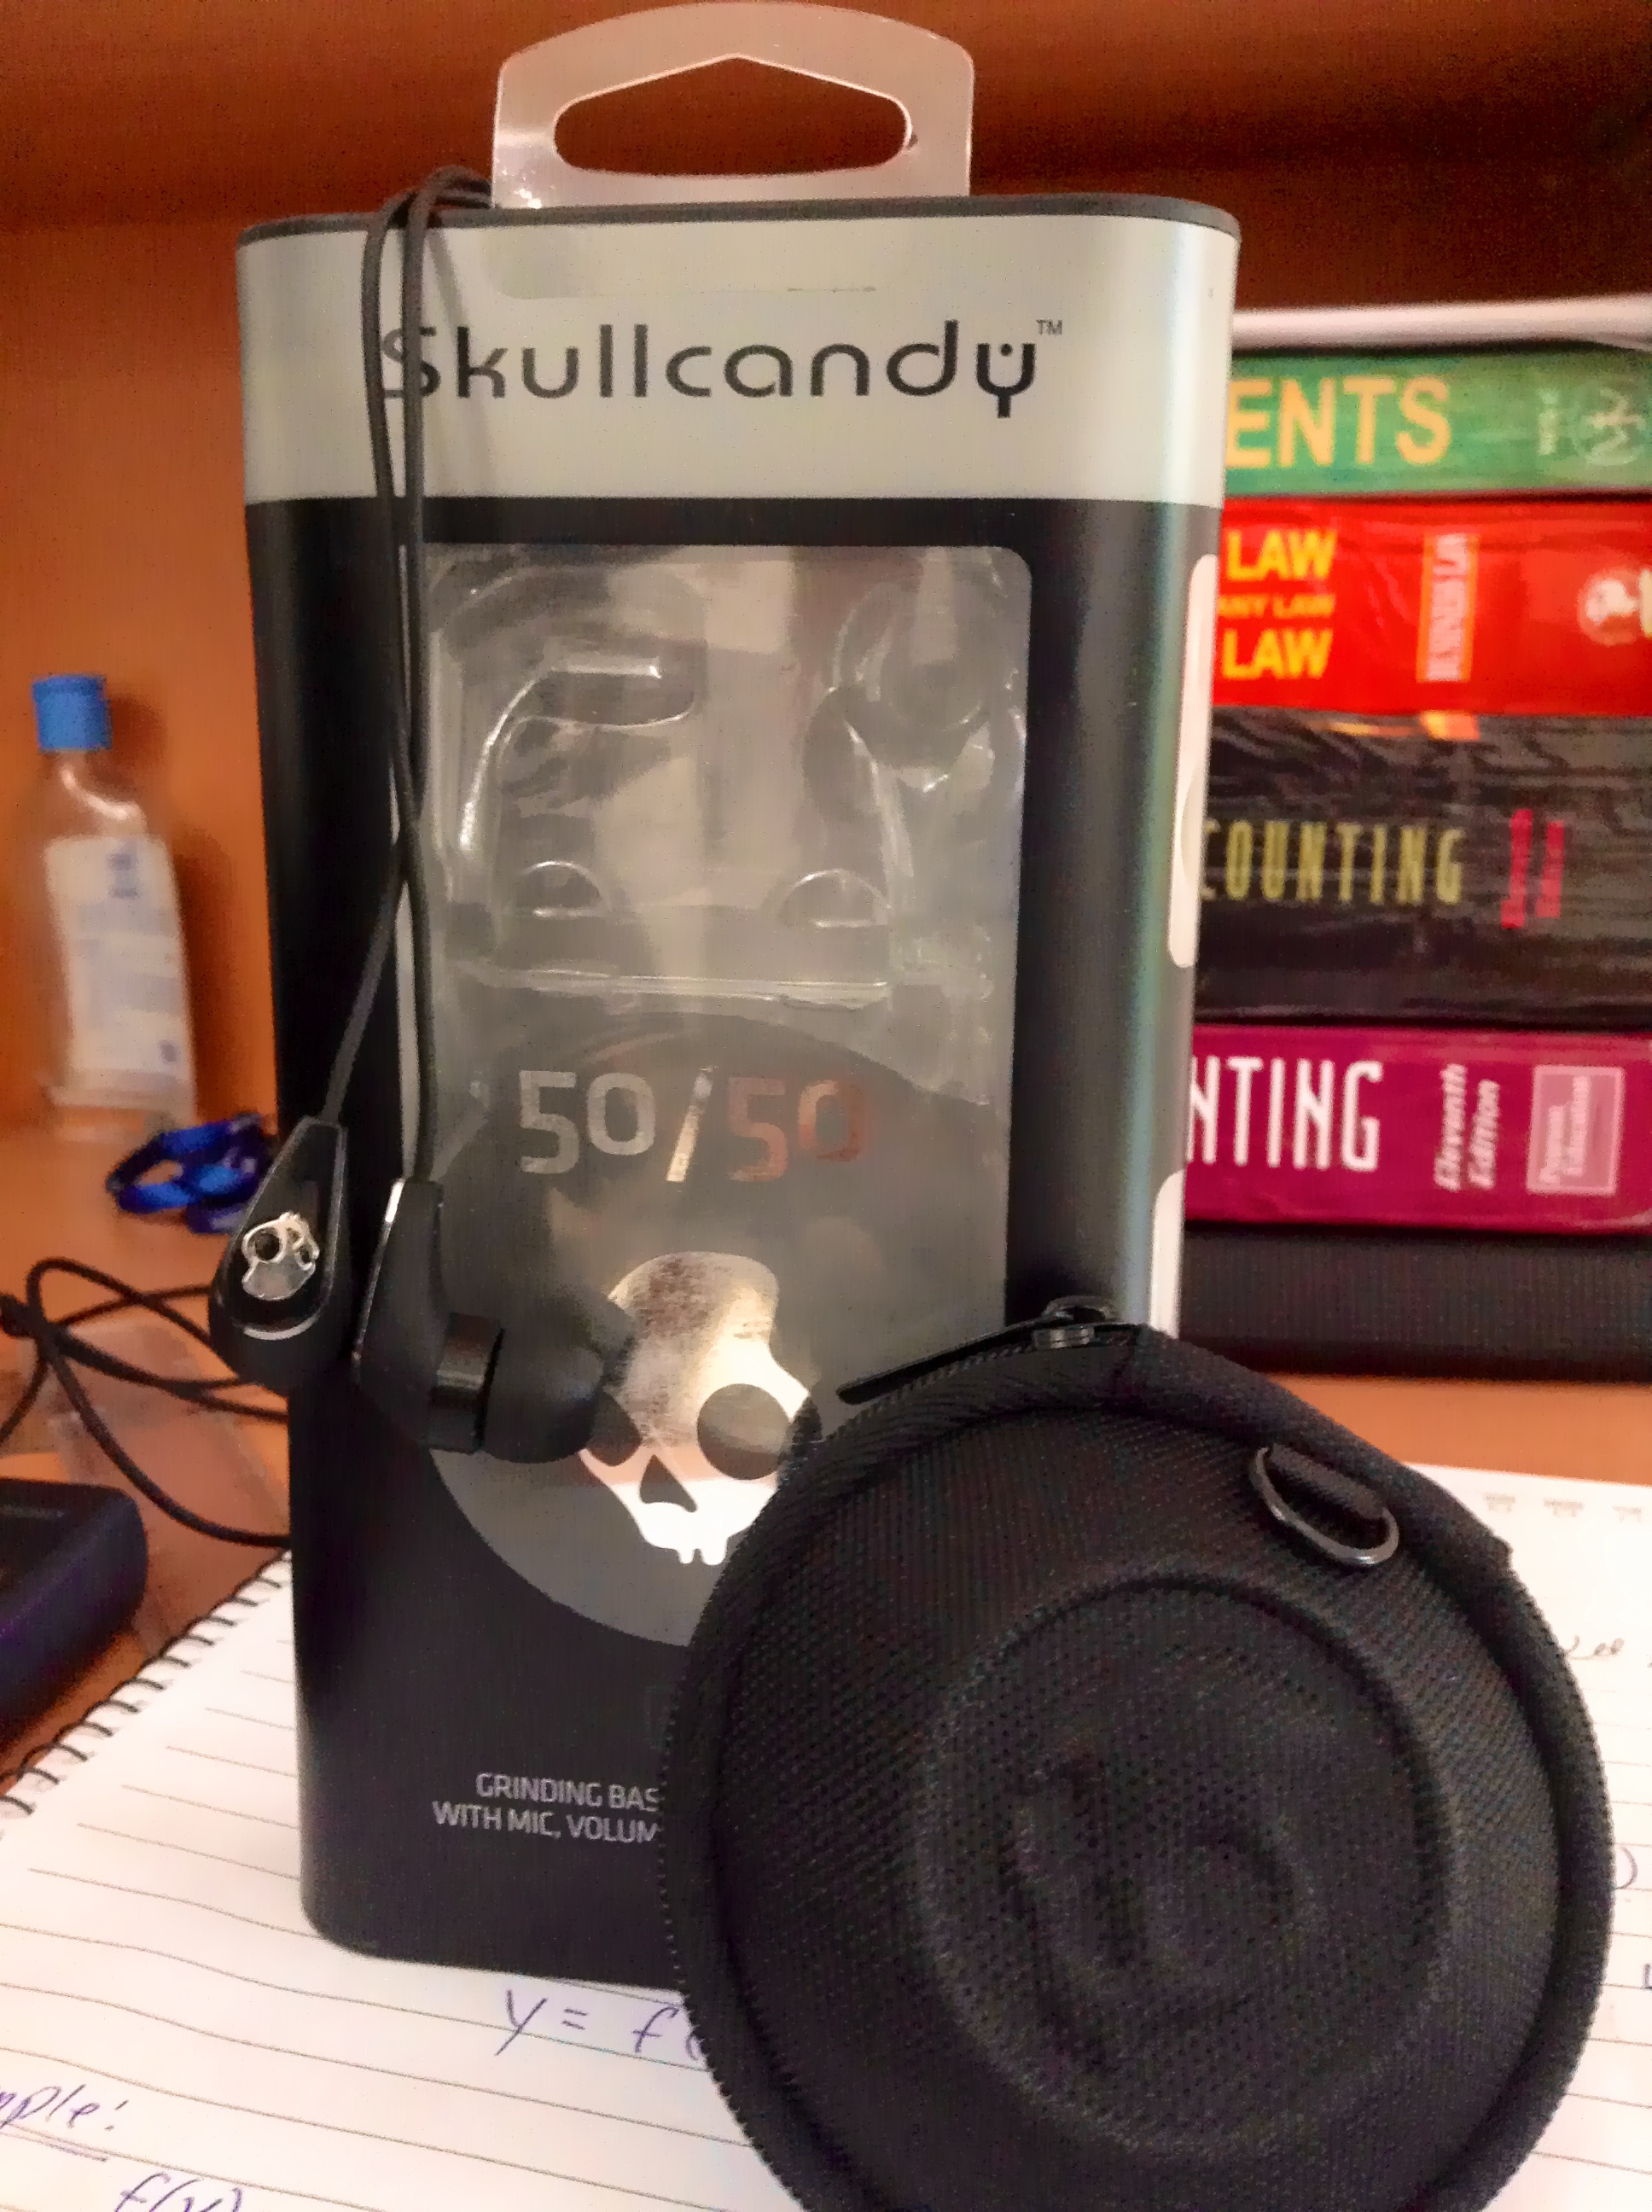 SKULLcandy 50 50 CALL 01676450060 PRICE negotiable large image 0